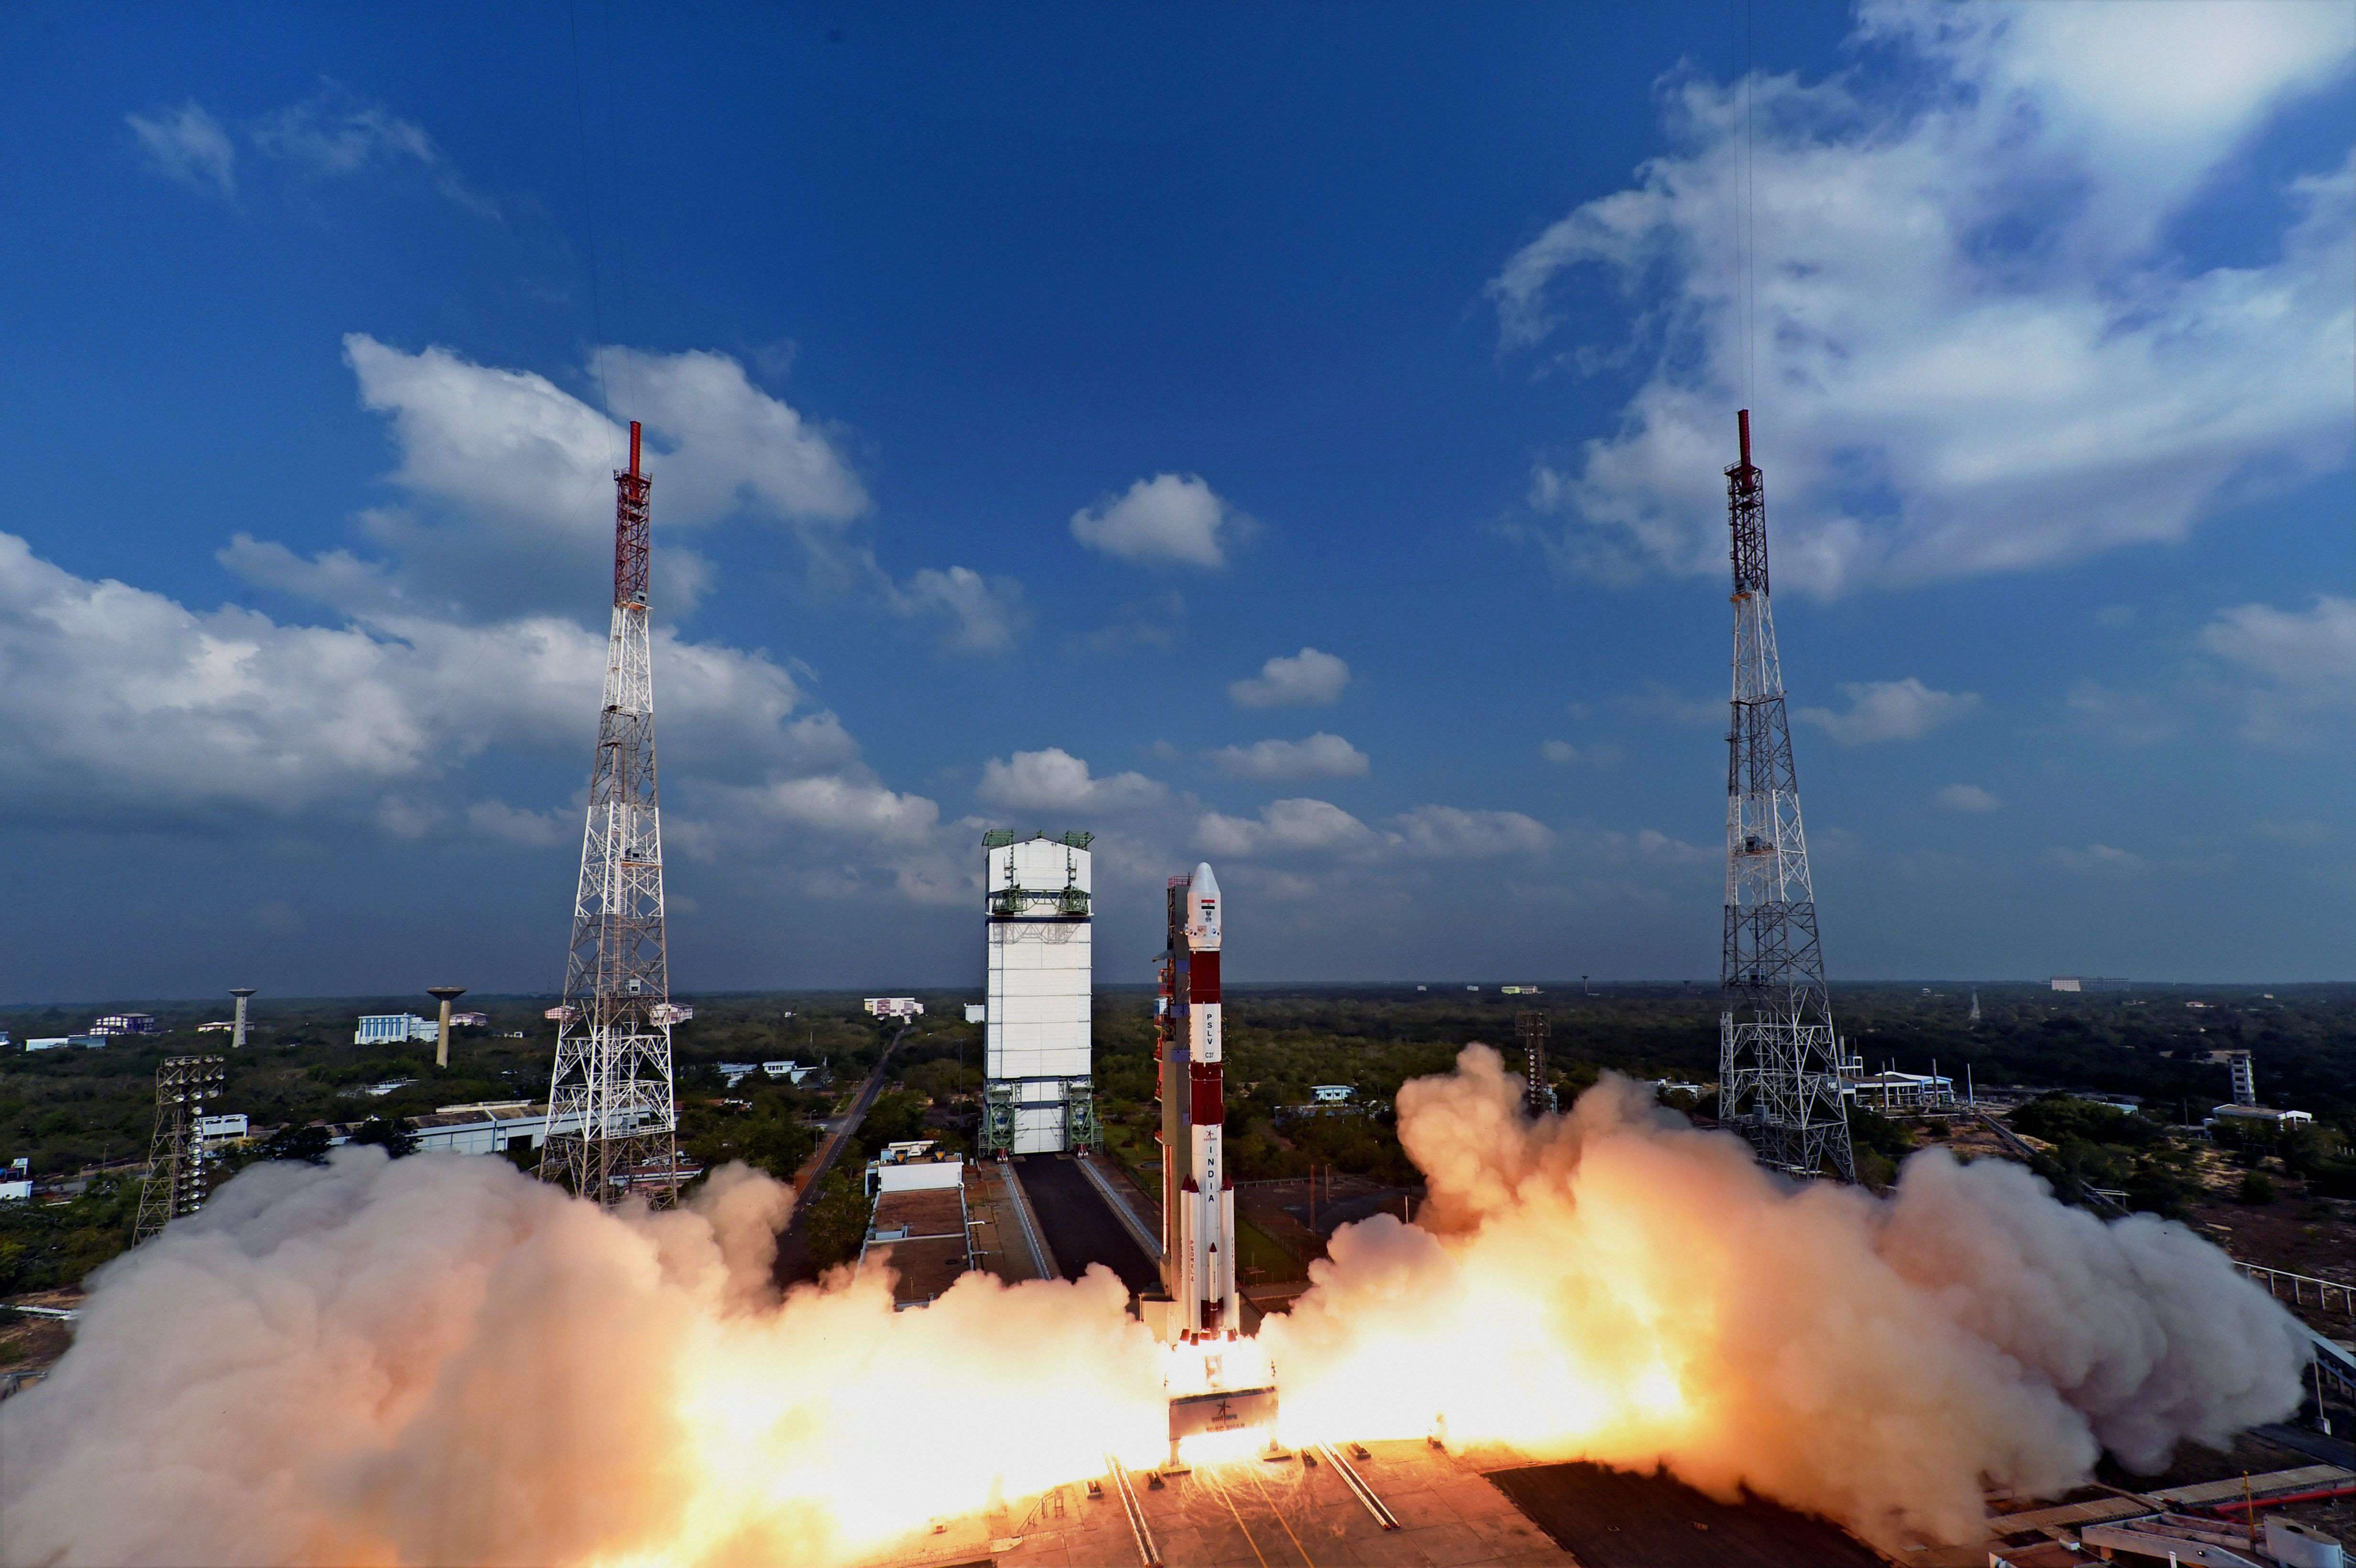 Sriharikota: Space agency Indian Space Research Organisation (ISRO) successfully launching a record 104 satellites, including Indias earth observation satellite on-board PSLV-C37/Cartosat2 Series from the spaceport of Sriharikota on Wednesday. PTI Photo / ISRO(PTI2_15_2017_000106B)